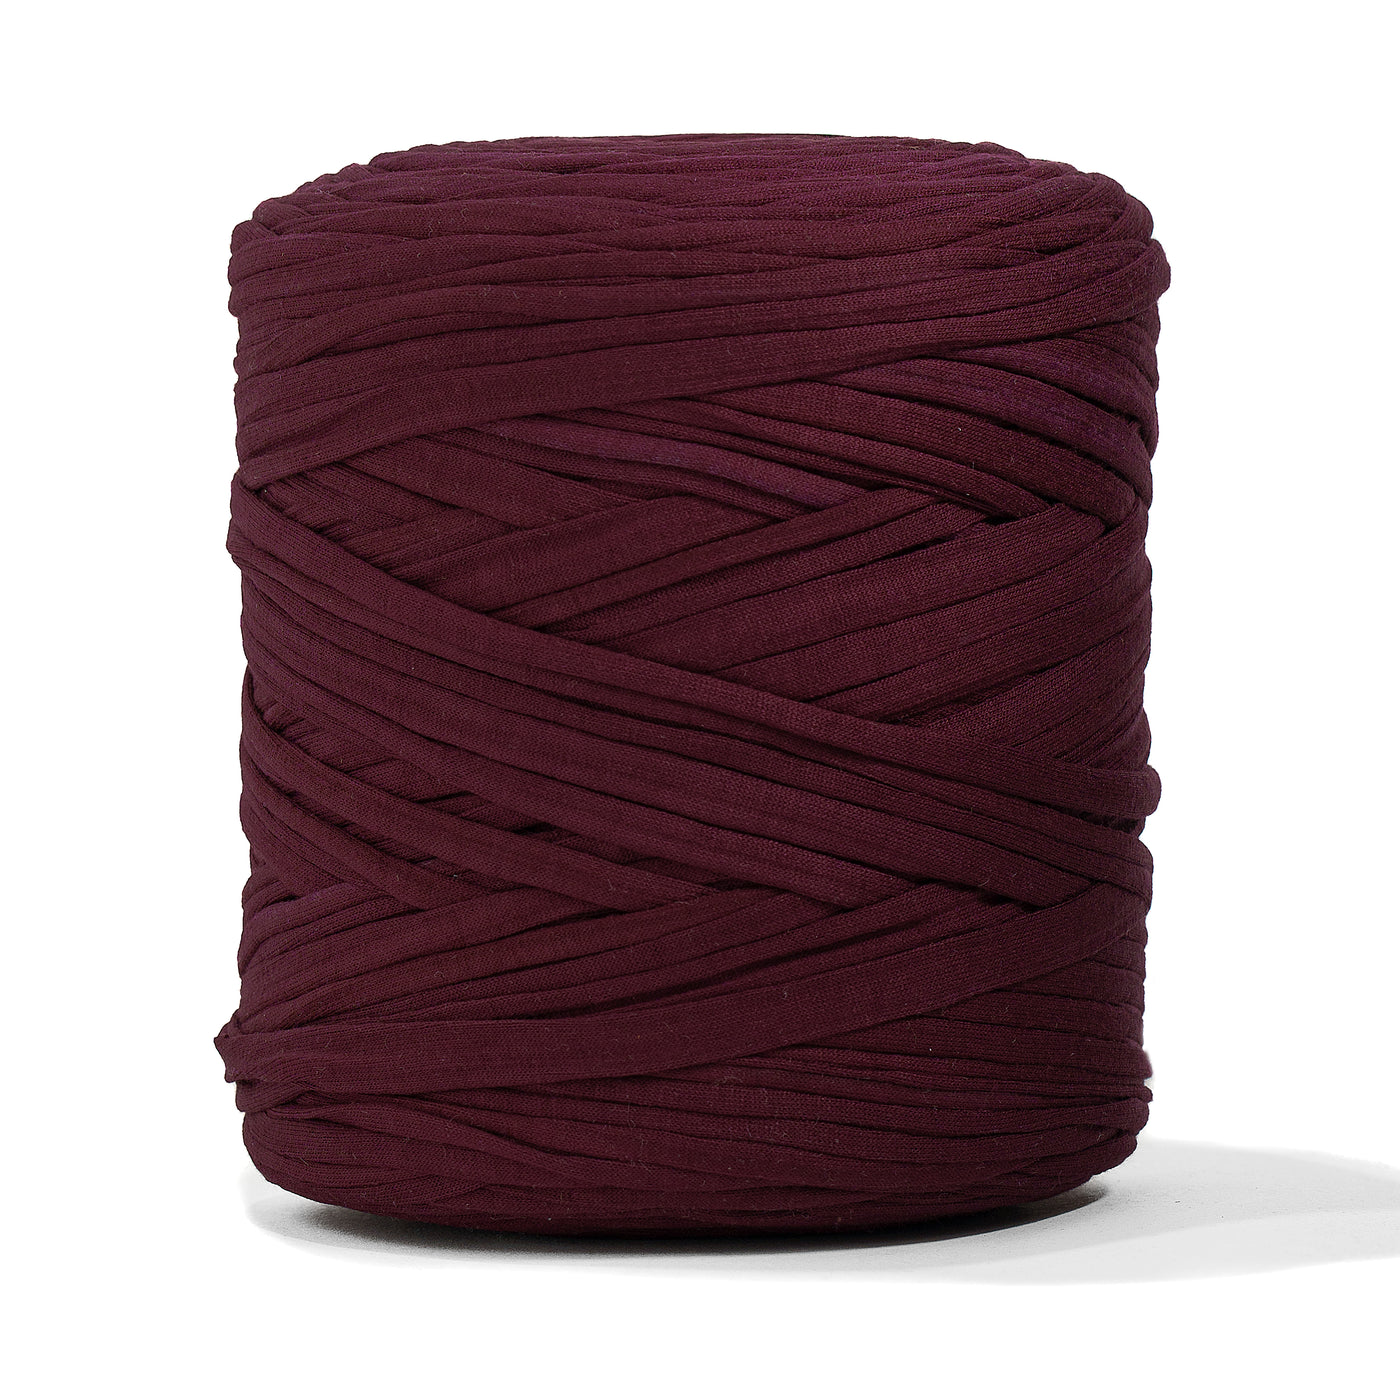 Recycled T-Shirt Fabric Yarn - Burgundy Color